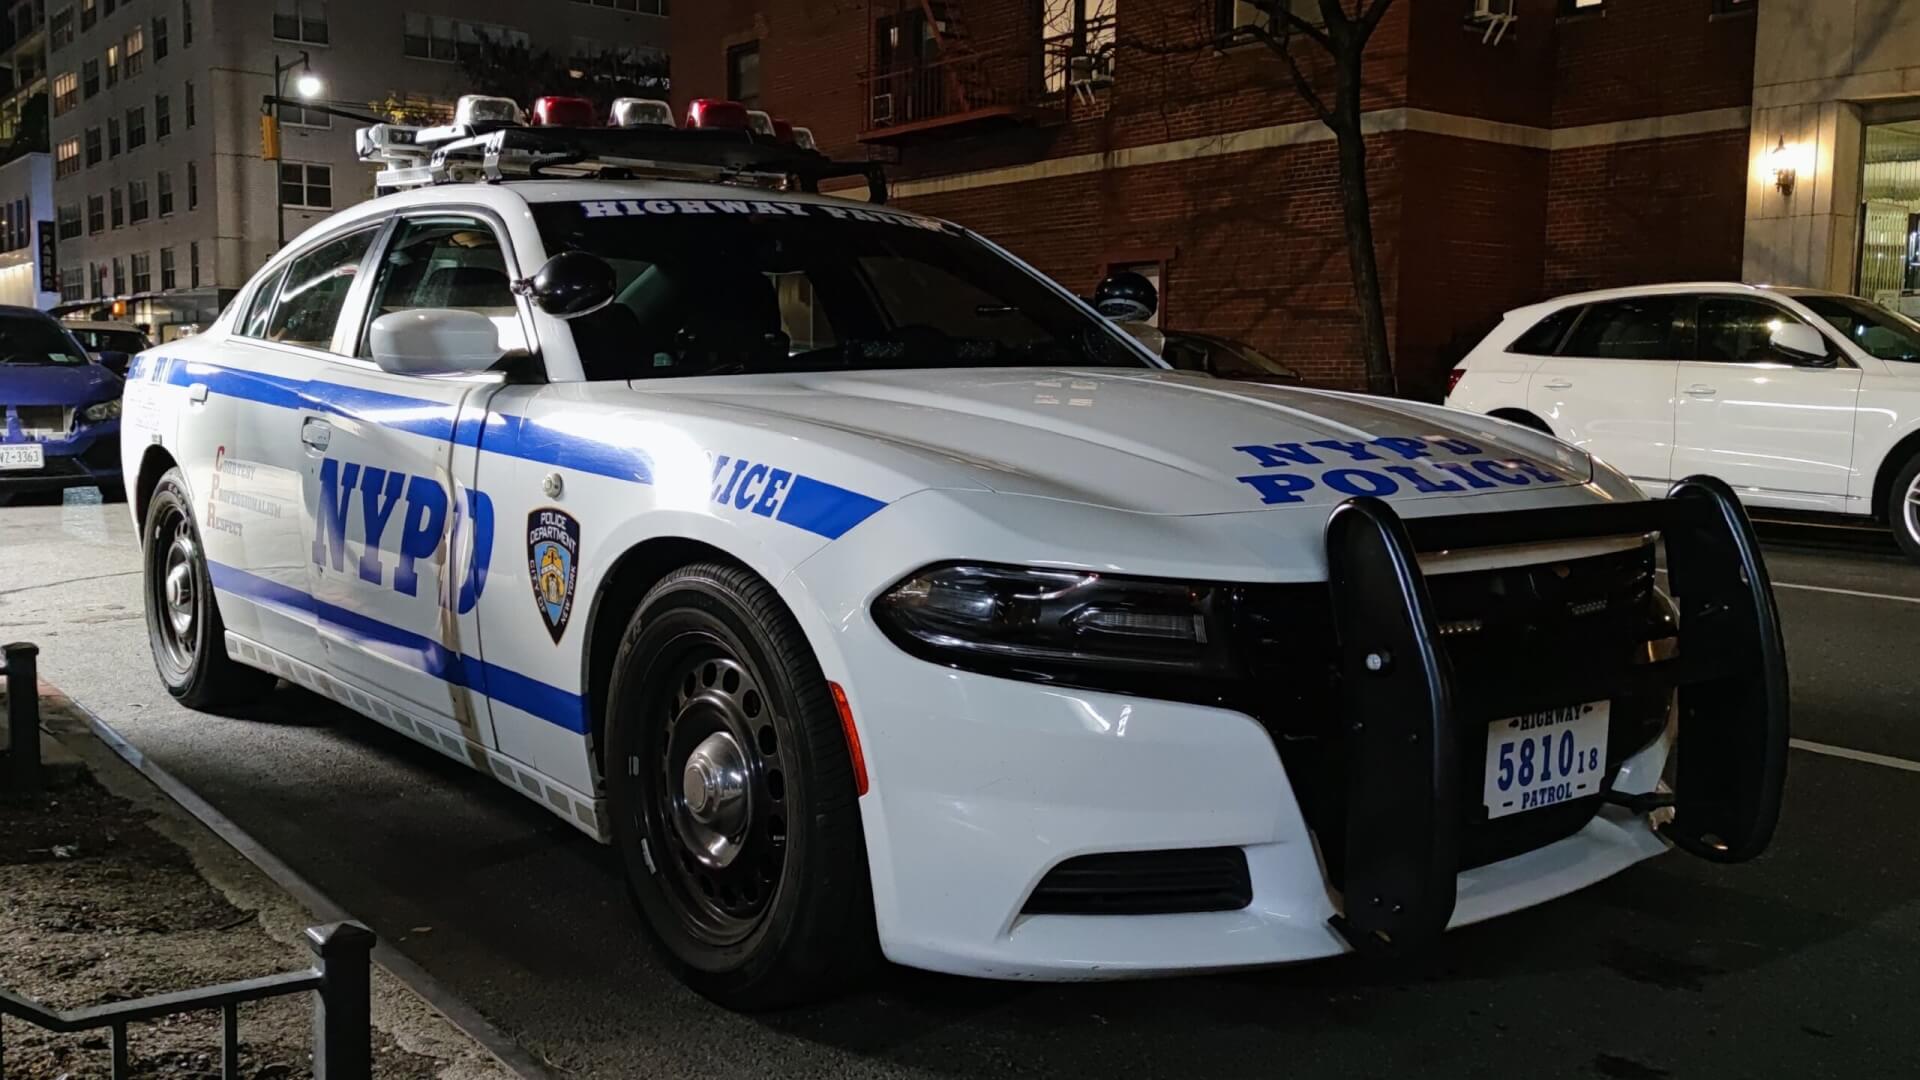 NYPD police cruiser parked on a sidewalk